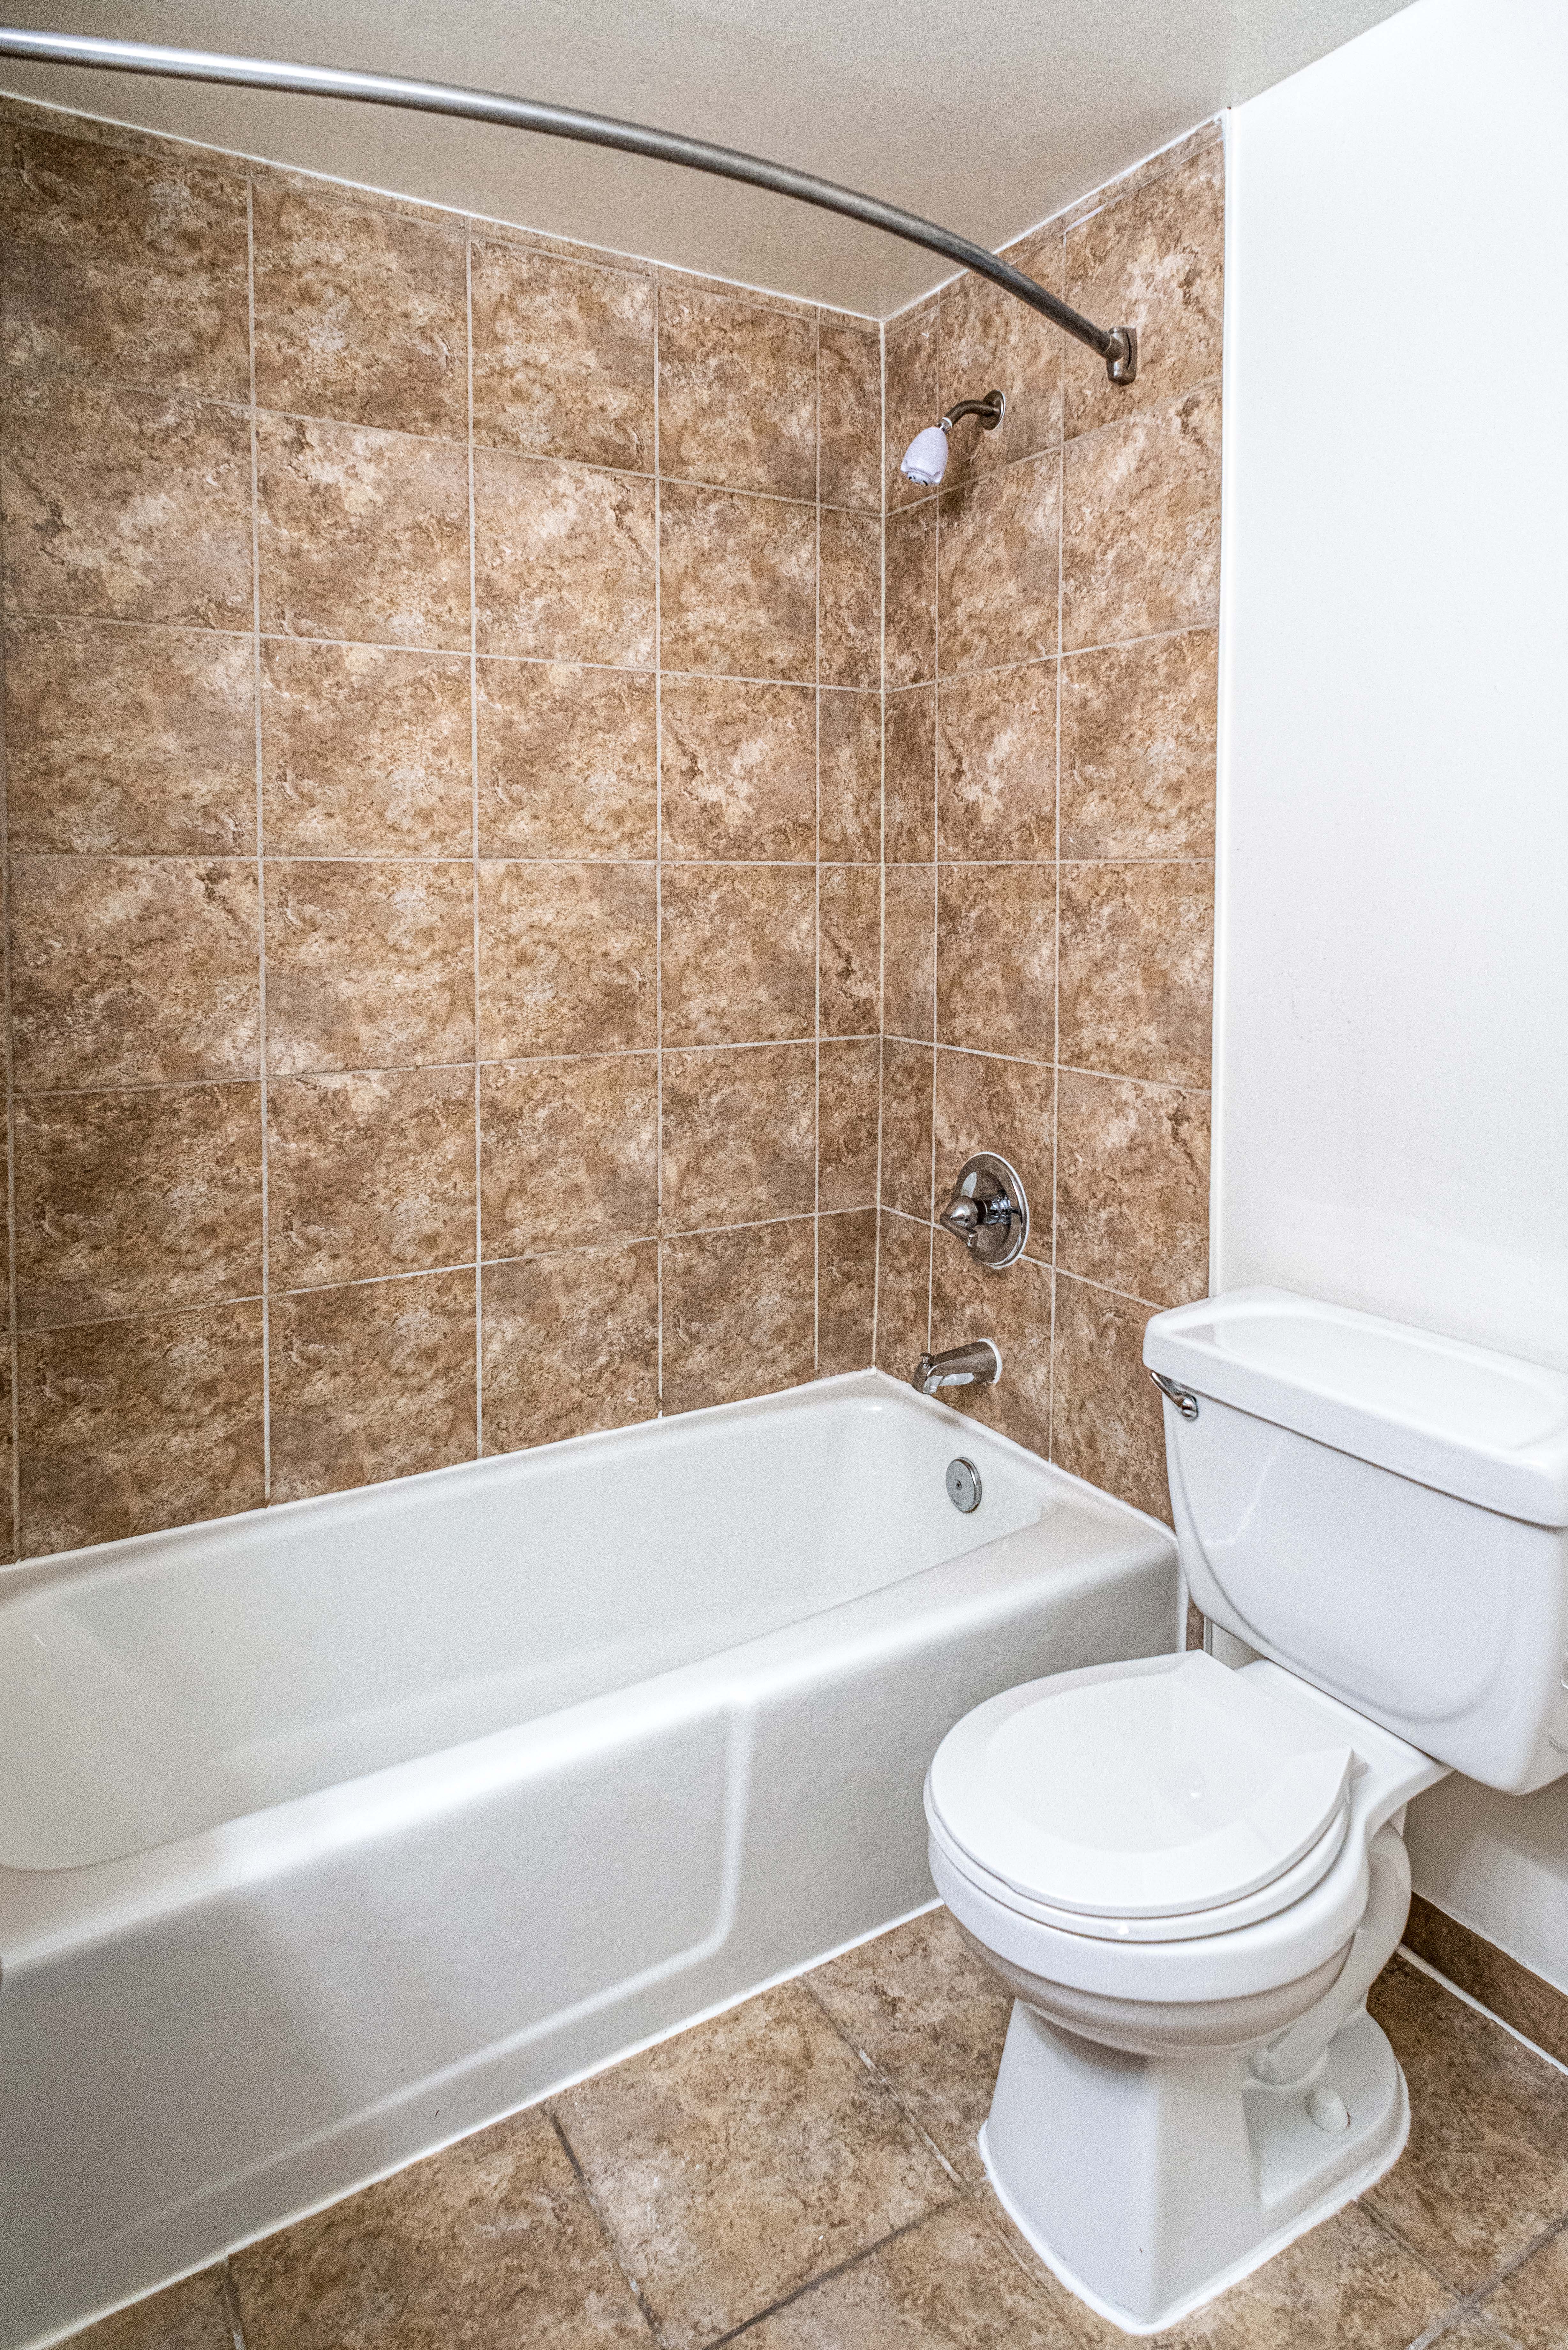 Updated bathrooms with tiled bathroom shower and tub, cherry maple vanity and premier lighting